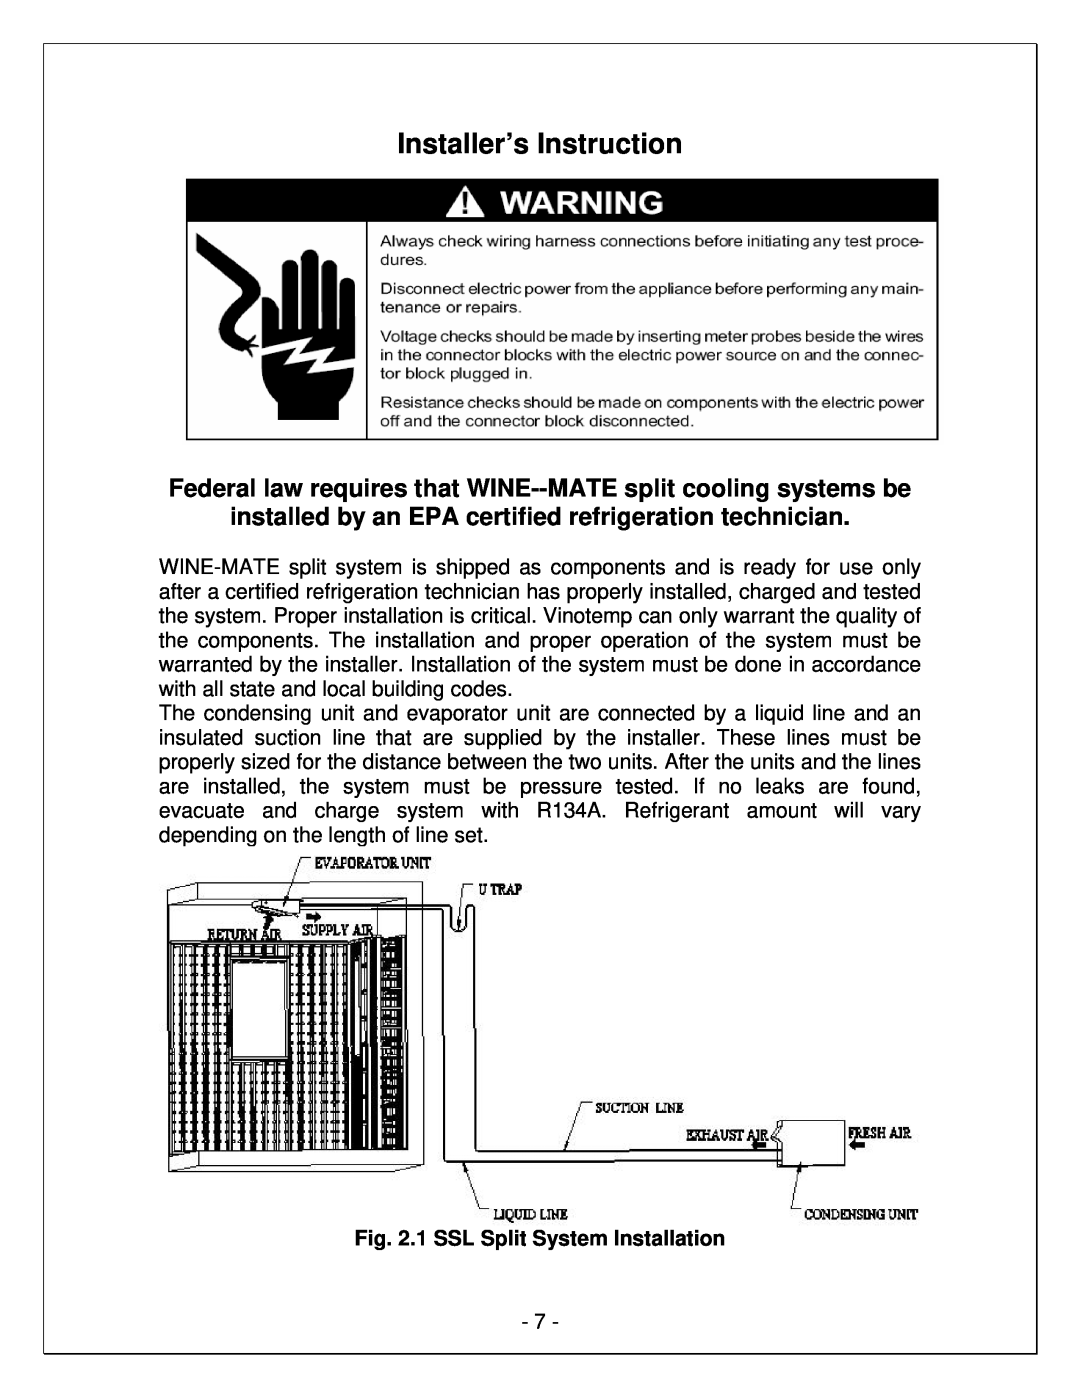 Vinotemp WM-15SFCL, VINO-6500SSL Installer’s Instruction, Federal law requires that WINE--MATE split cooling systems be 